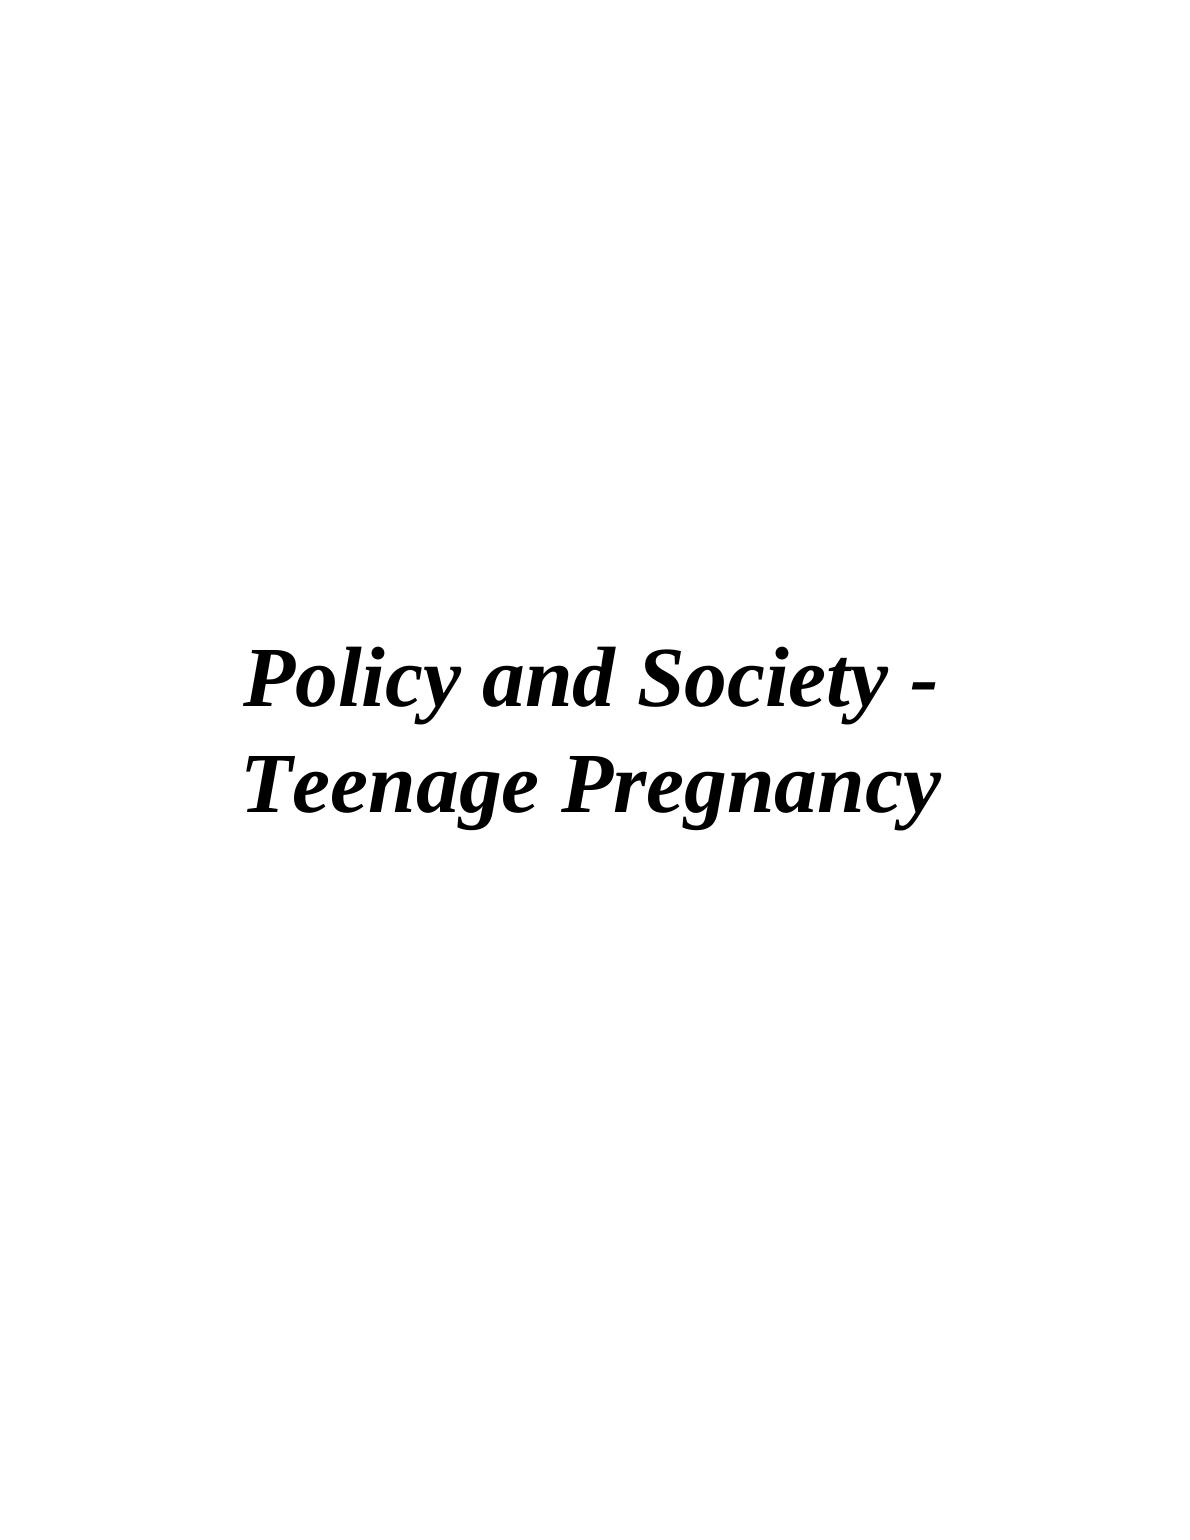 Teenage Pregnancy: Risks, Responsibility, and Strategies_1